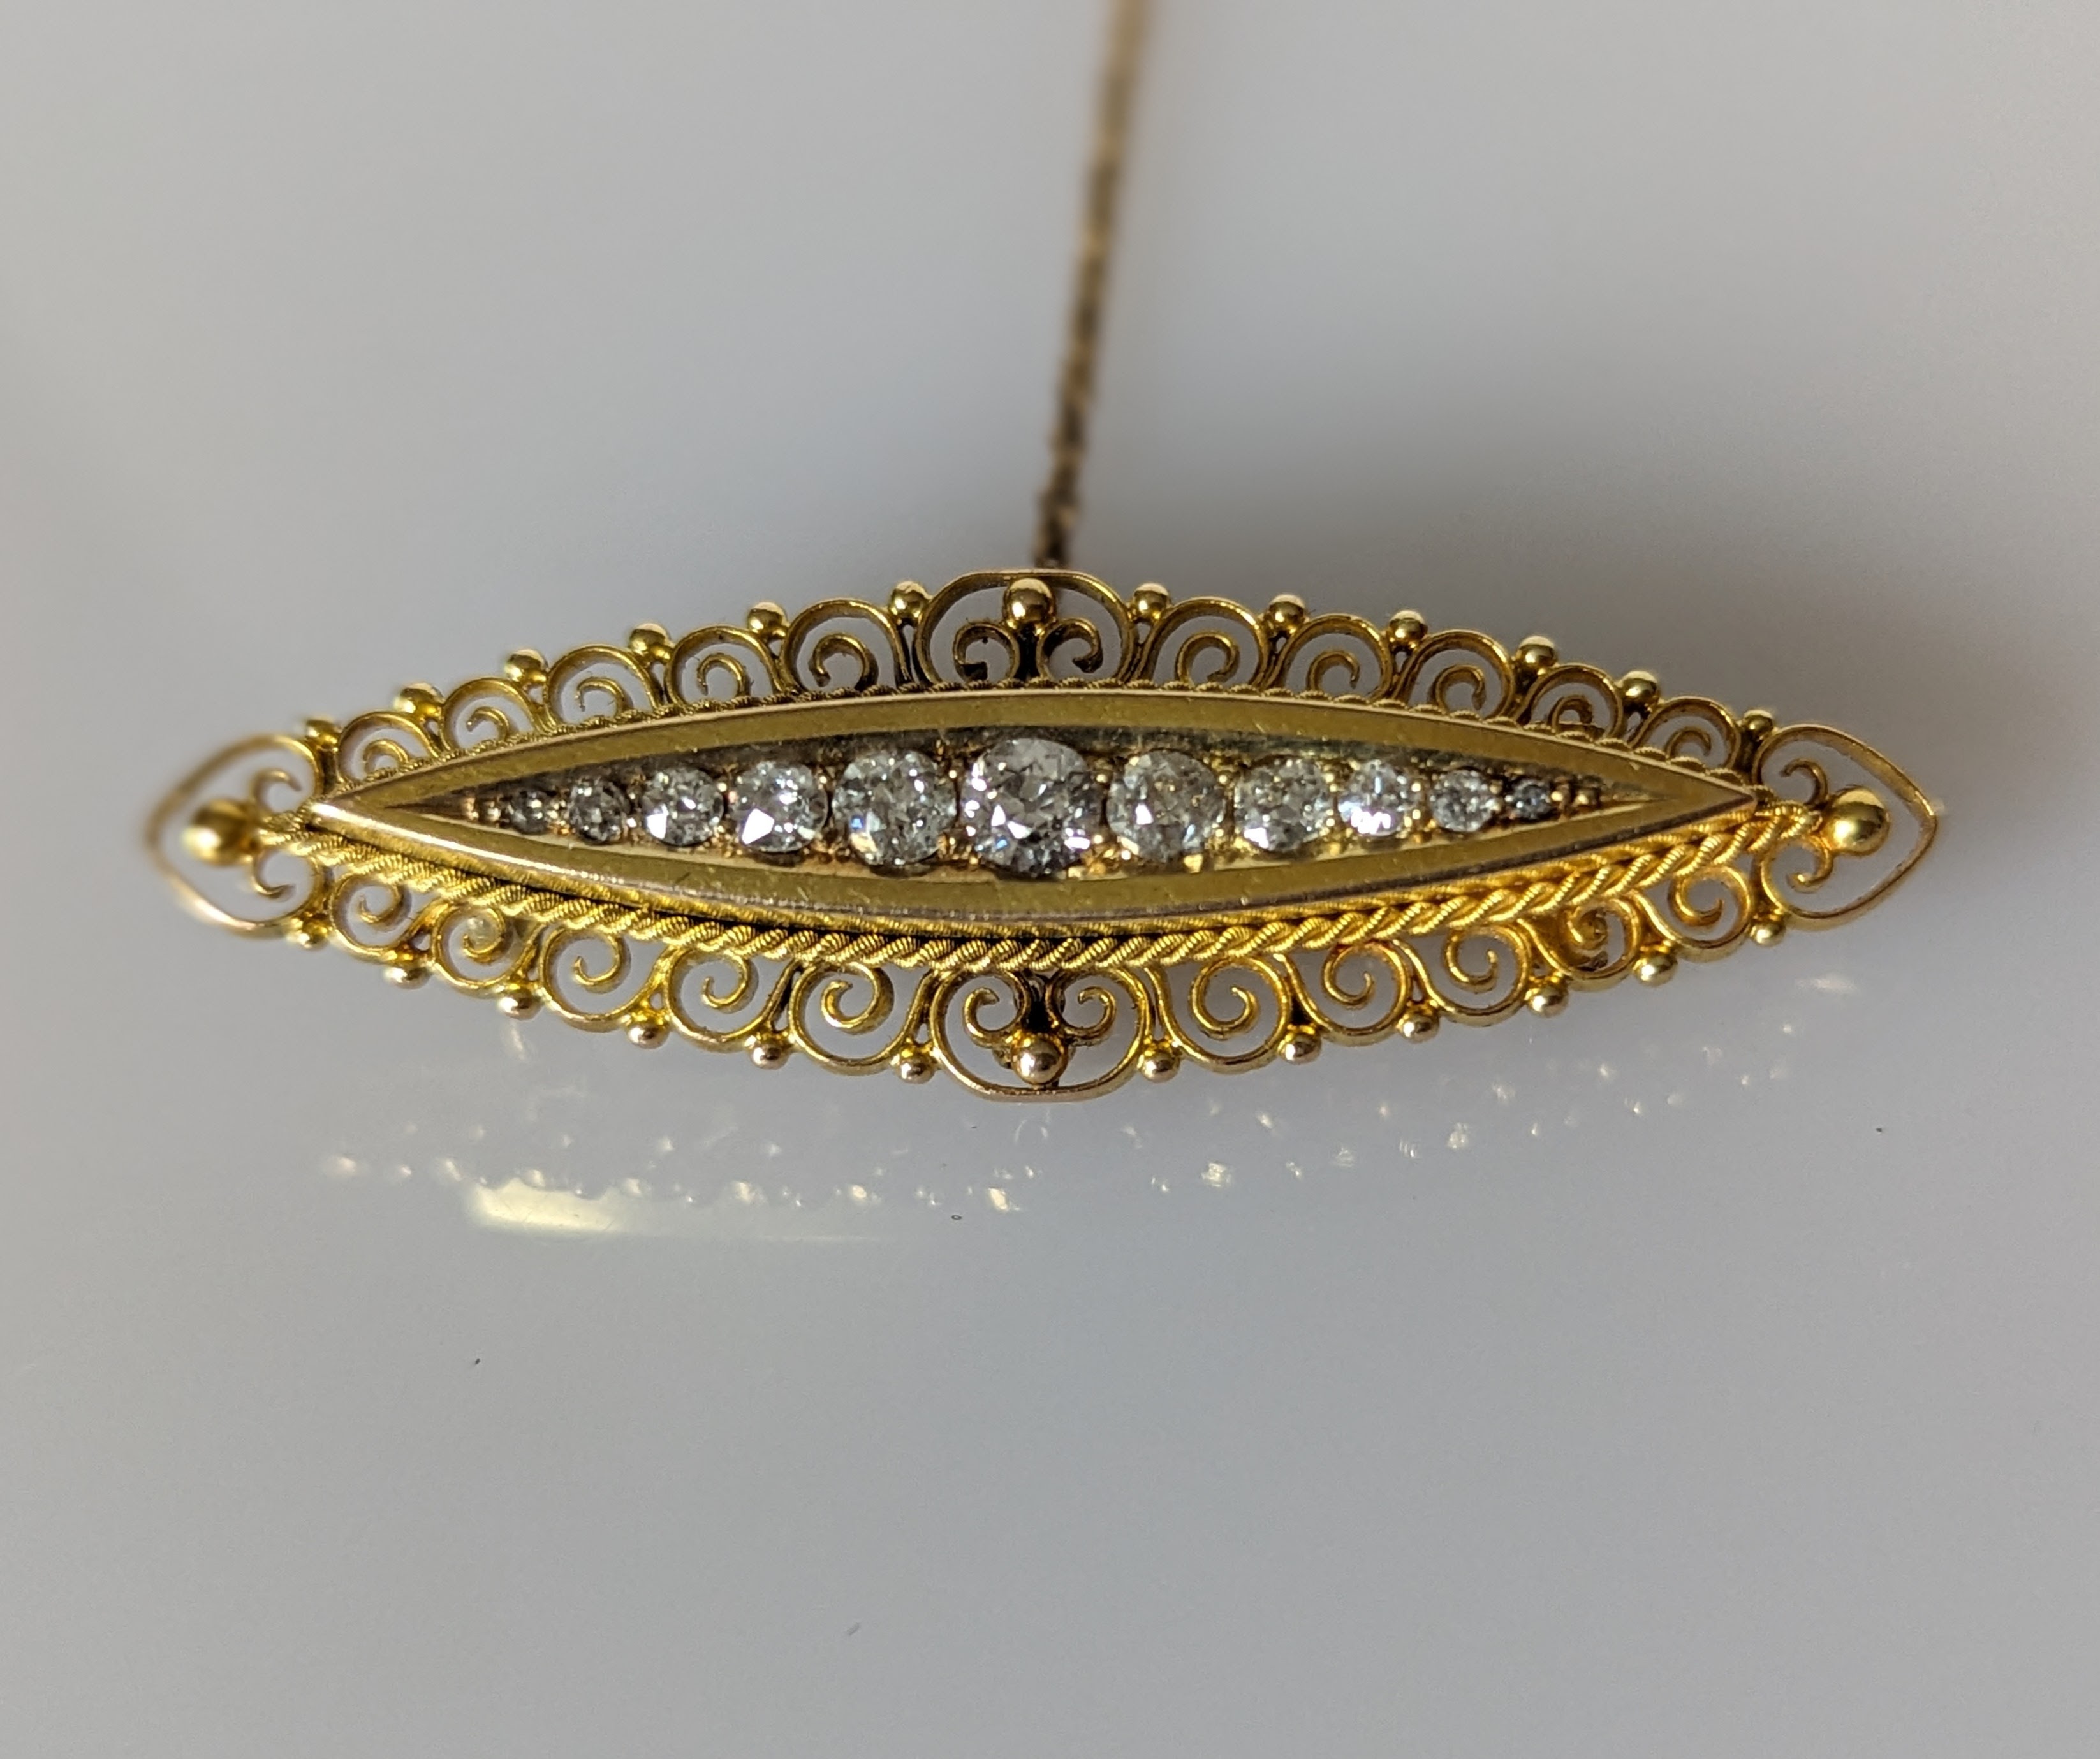 A Victorian-style  yellow gold bar brooch with pave-set round-cut diamonds, largest 0.15 carats